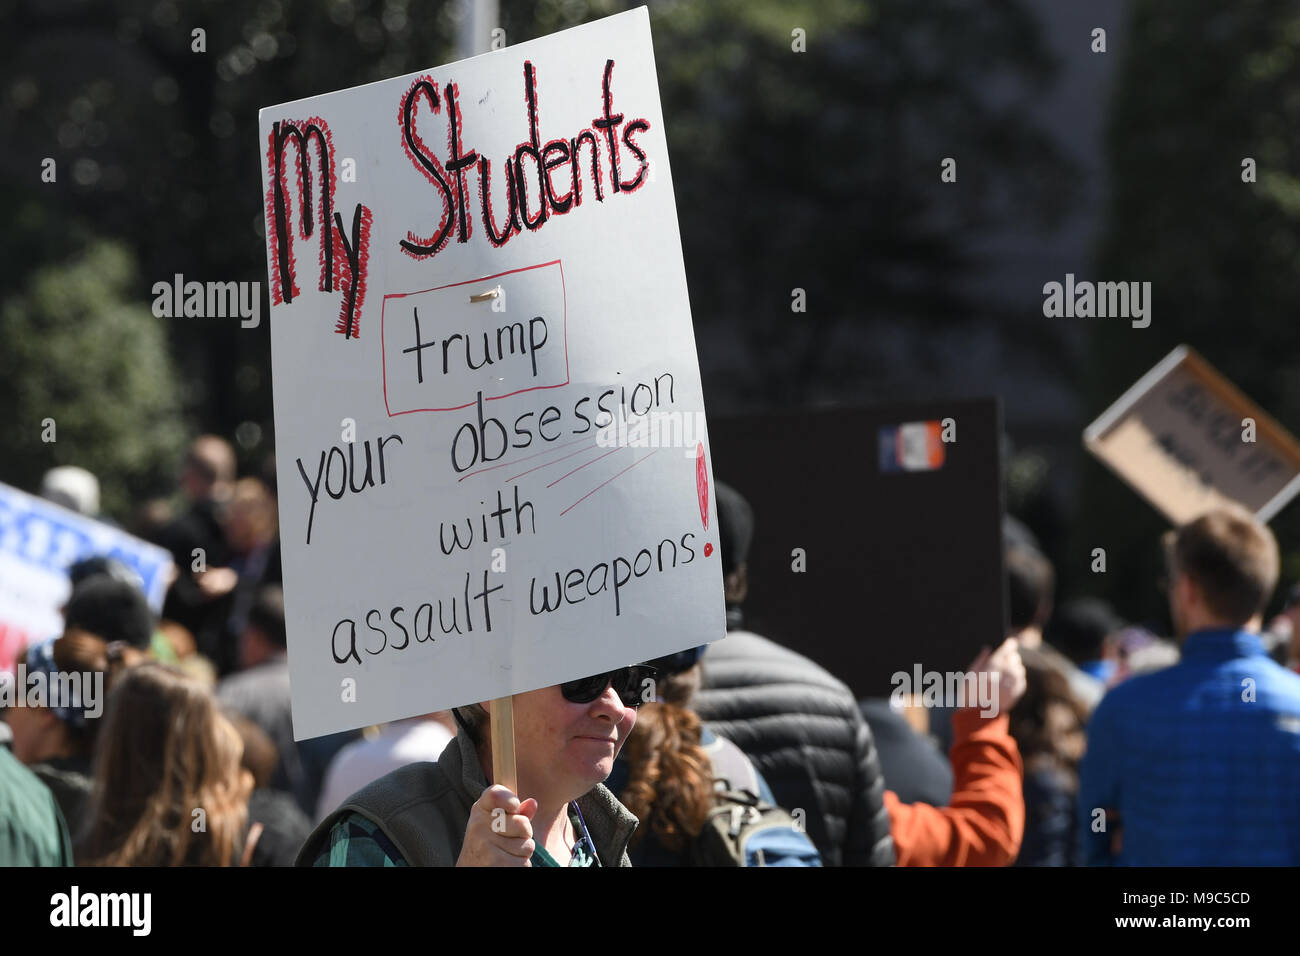 Washington, DC, USA. 24th Mar, 2018. A teacher marches with a sign during the March for your Lives protest and march for gun control in the United States, held on Pennsylvania Avenue in Washington, DC. Credit: csm/Alamy Live News Stock Photo